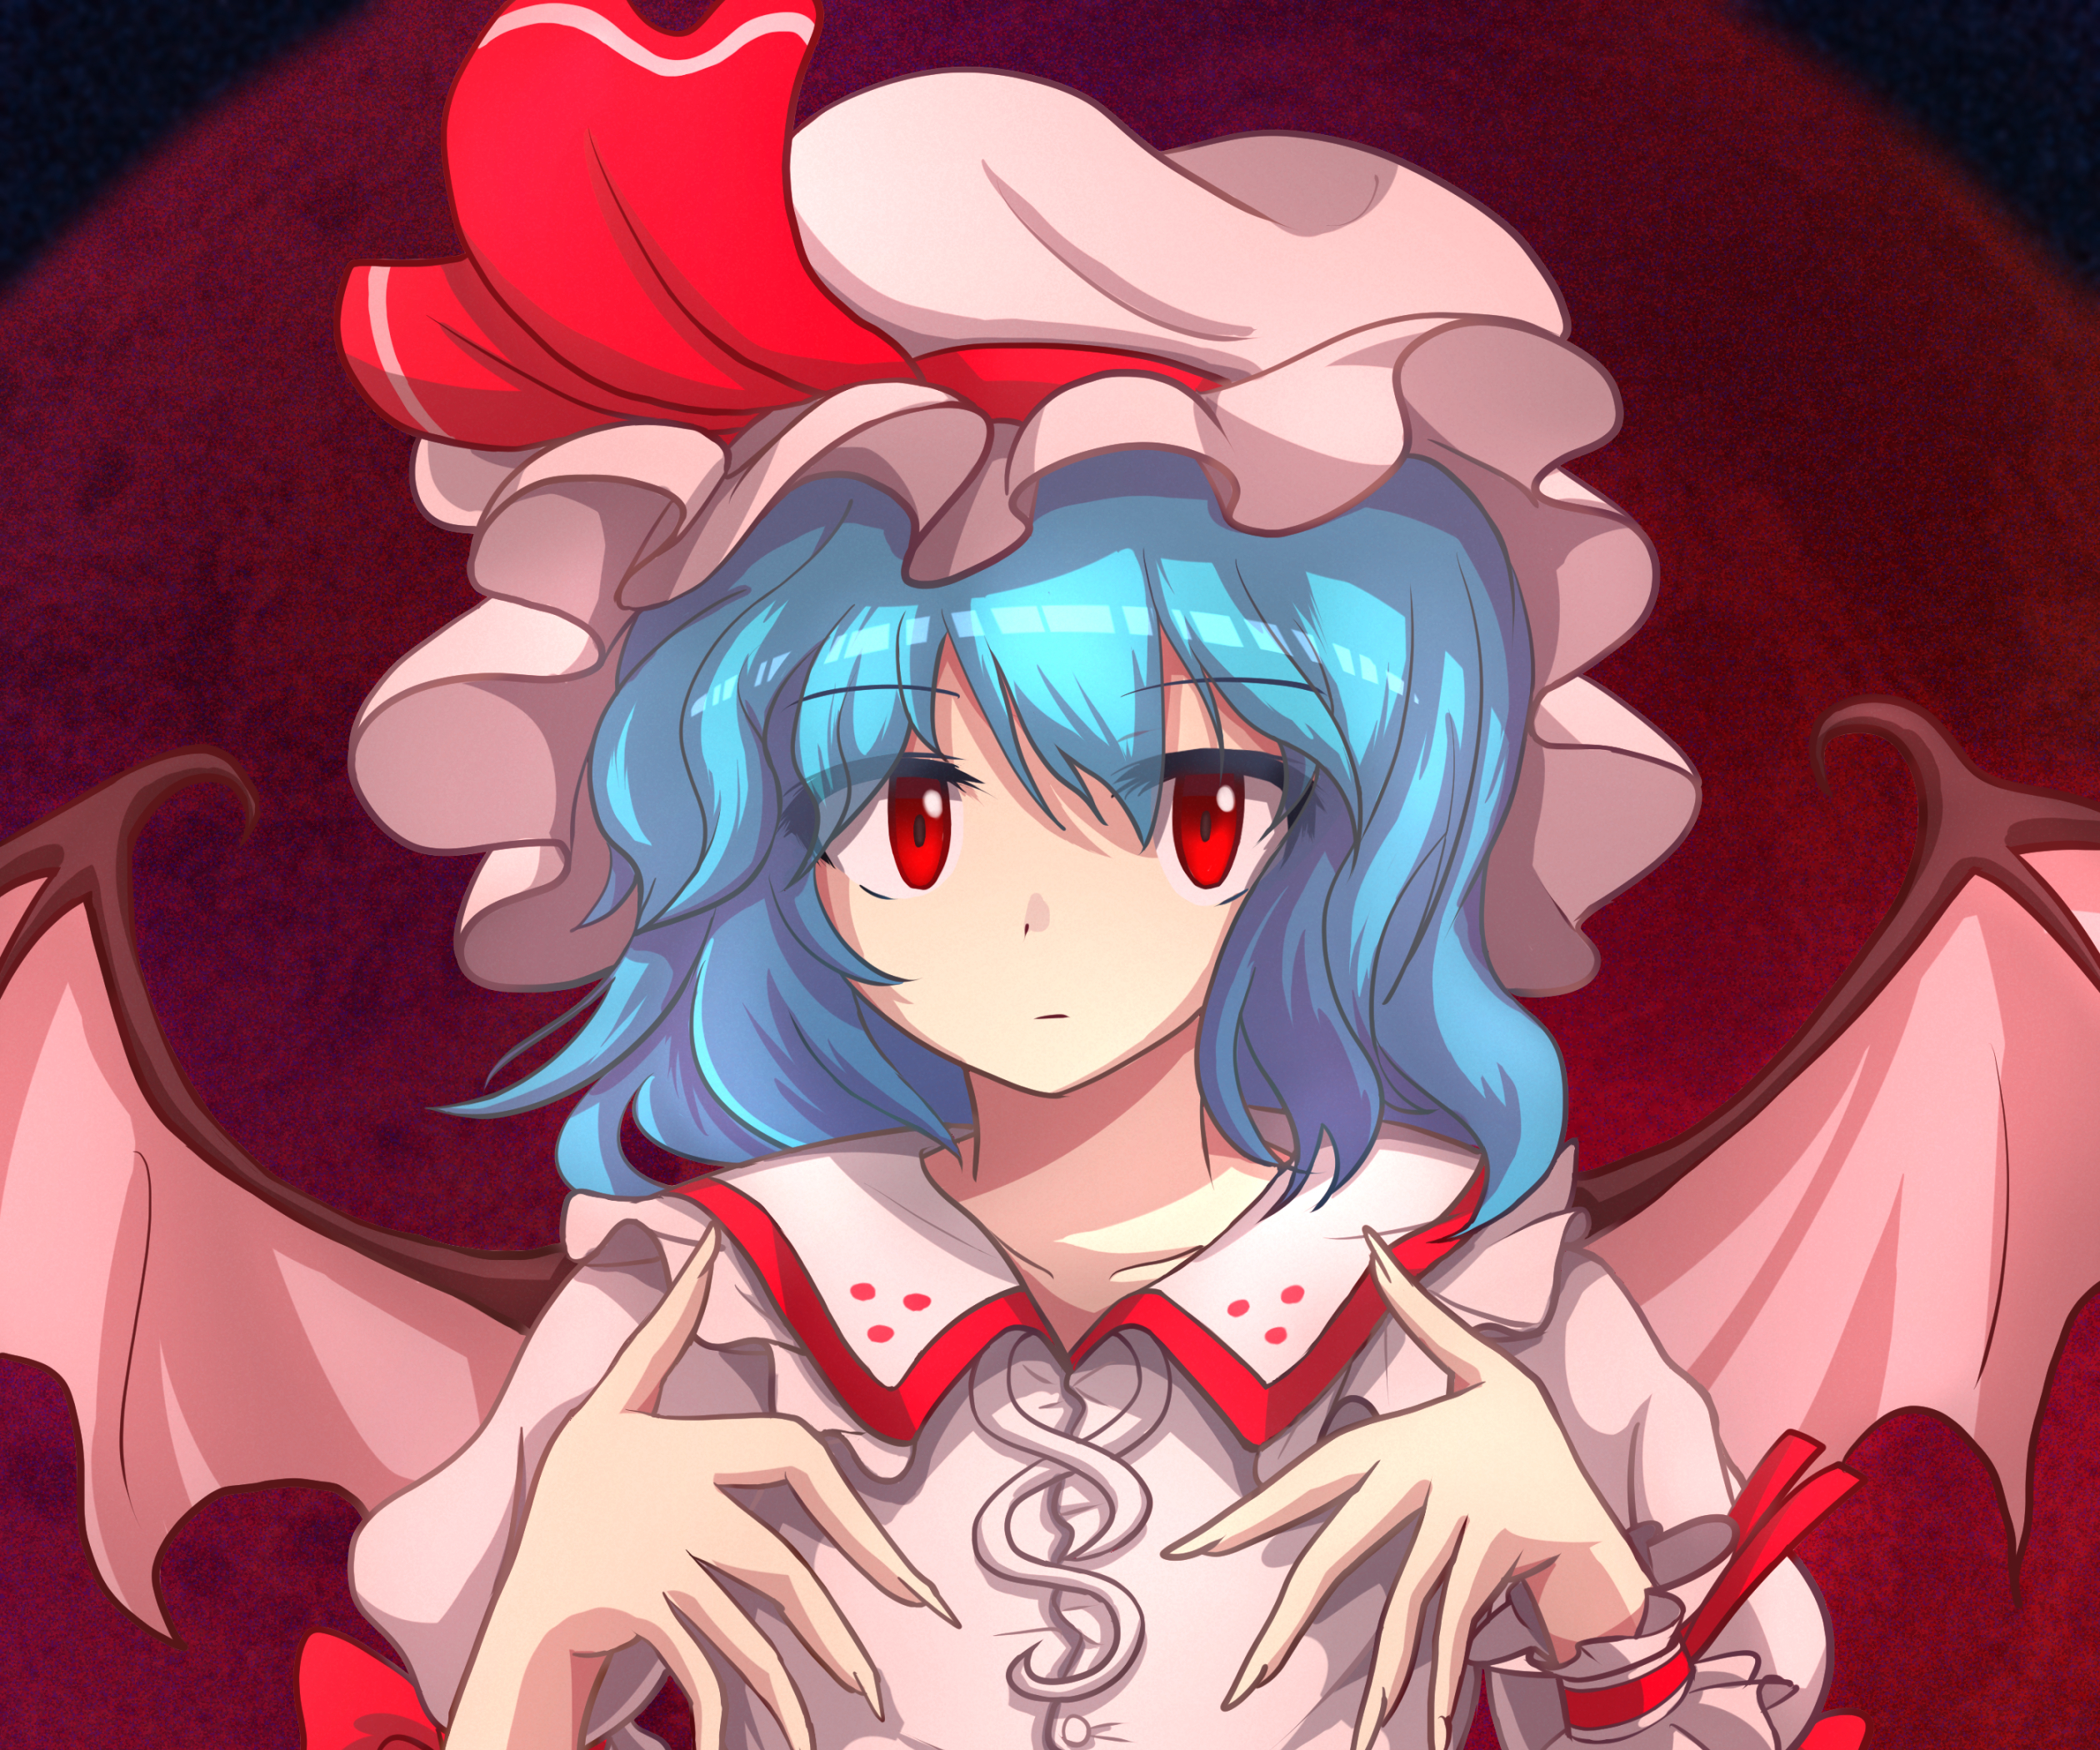 Remilia Scarlet by Gurina